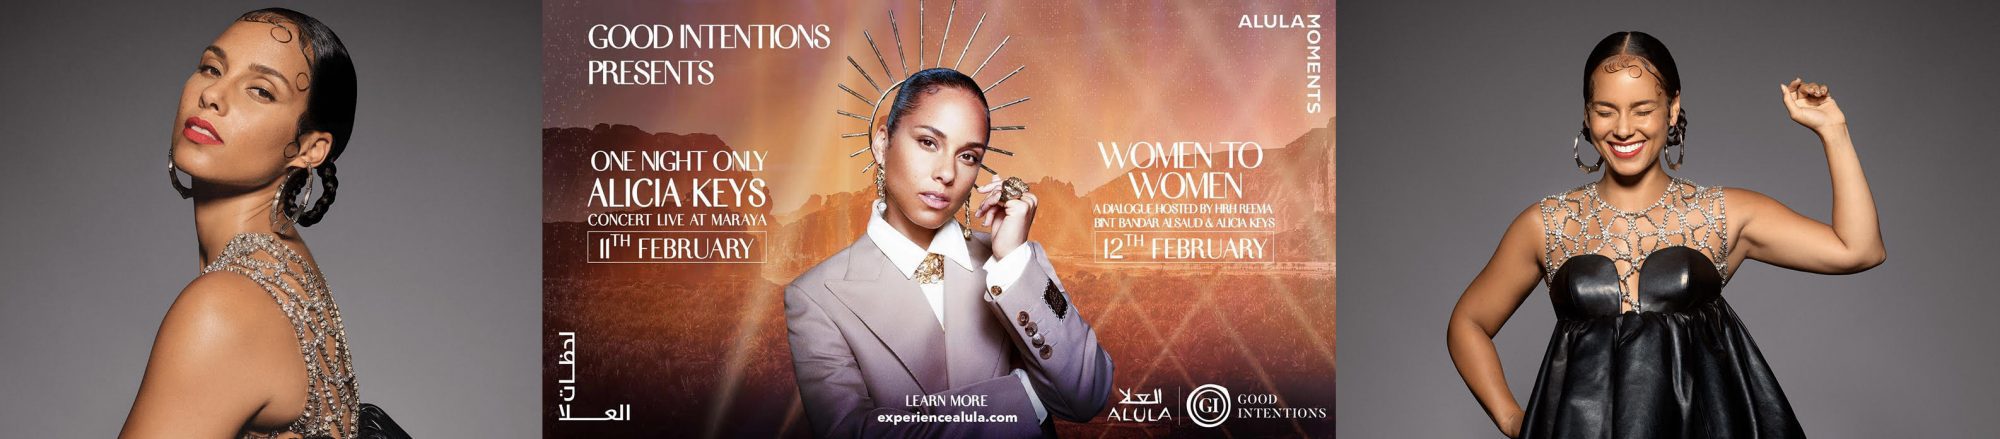 Good Intentions Presents Superstar Alicia Keys “One Night Only” At Maraya In AlUla